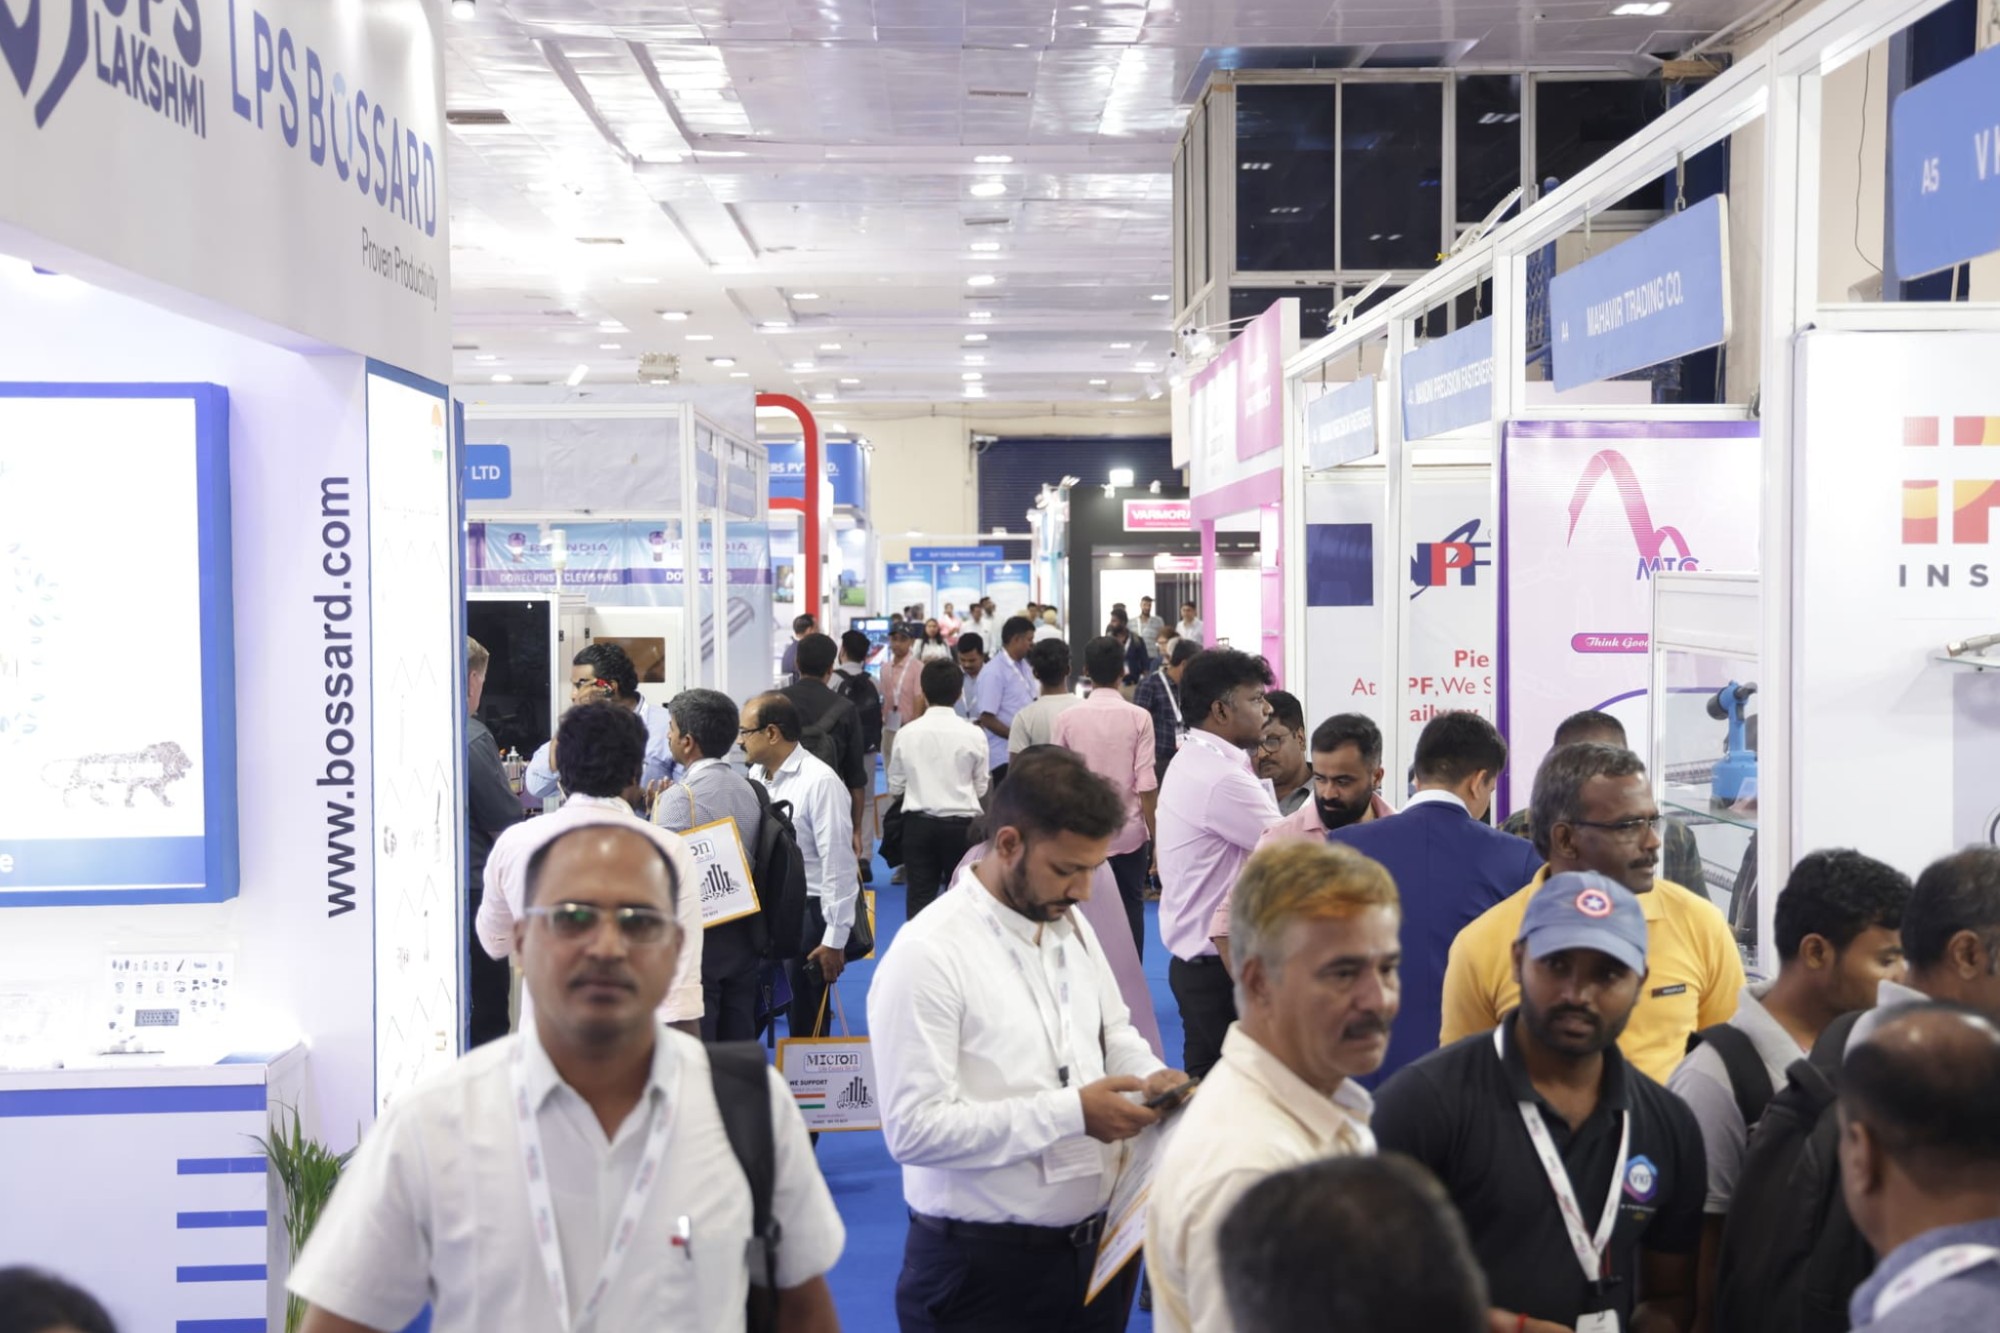 The India Fastener Show South concluded its debut edition in Chennai, Tamil Nadu on a high note, marking another milestone in the fastener and manufacturing industry.